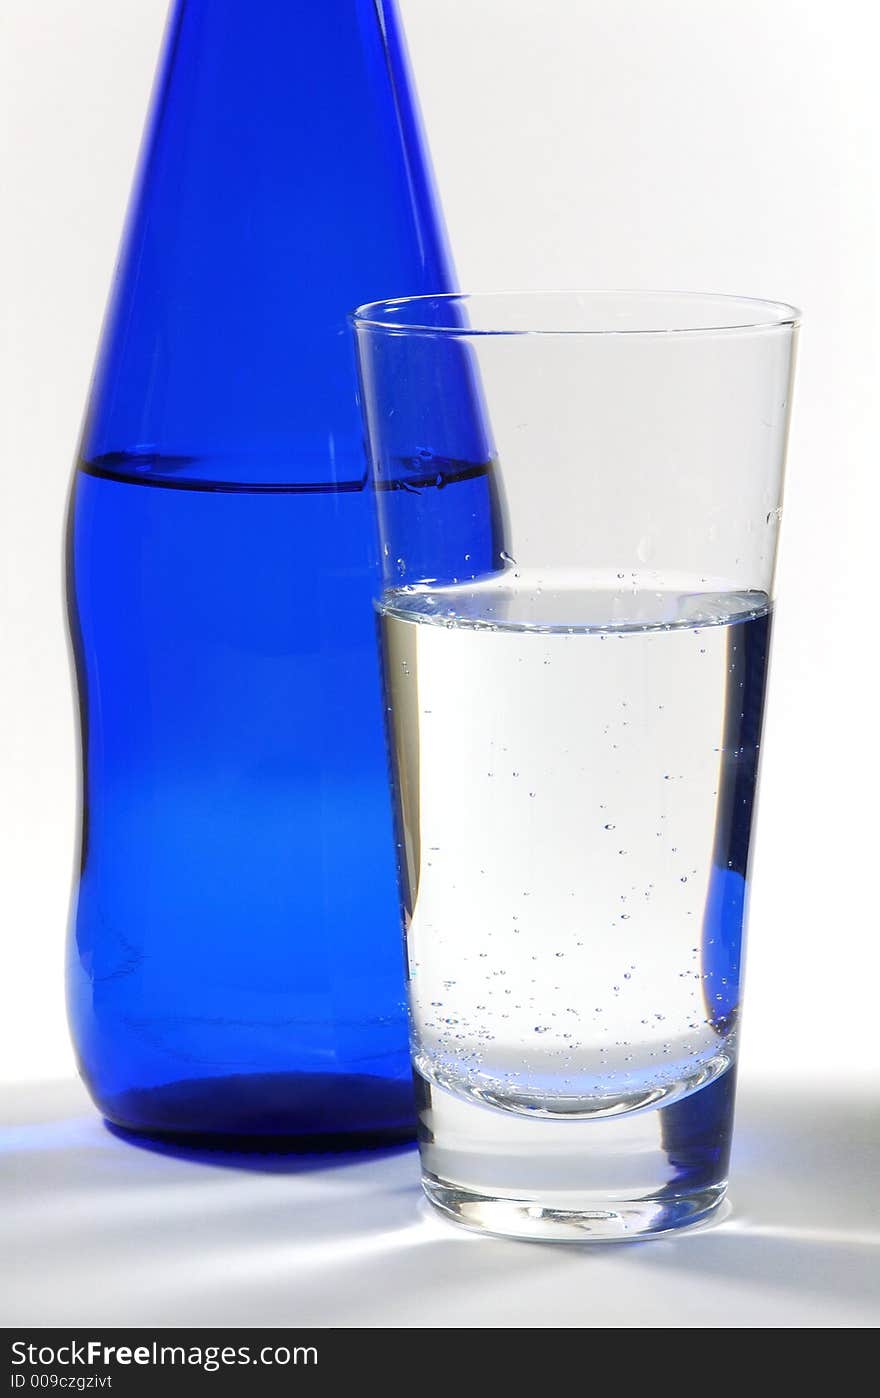 Glass of Mineral Water and Blue Bottle. Glass of Mineral Water and Blue Bottle